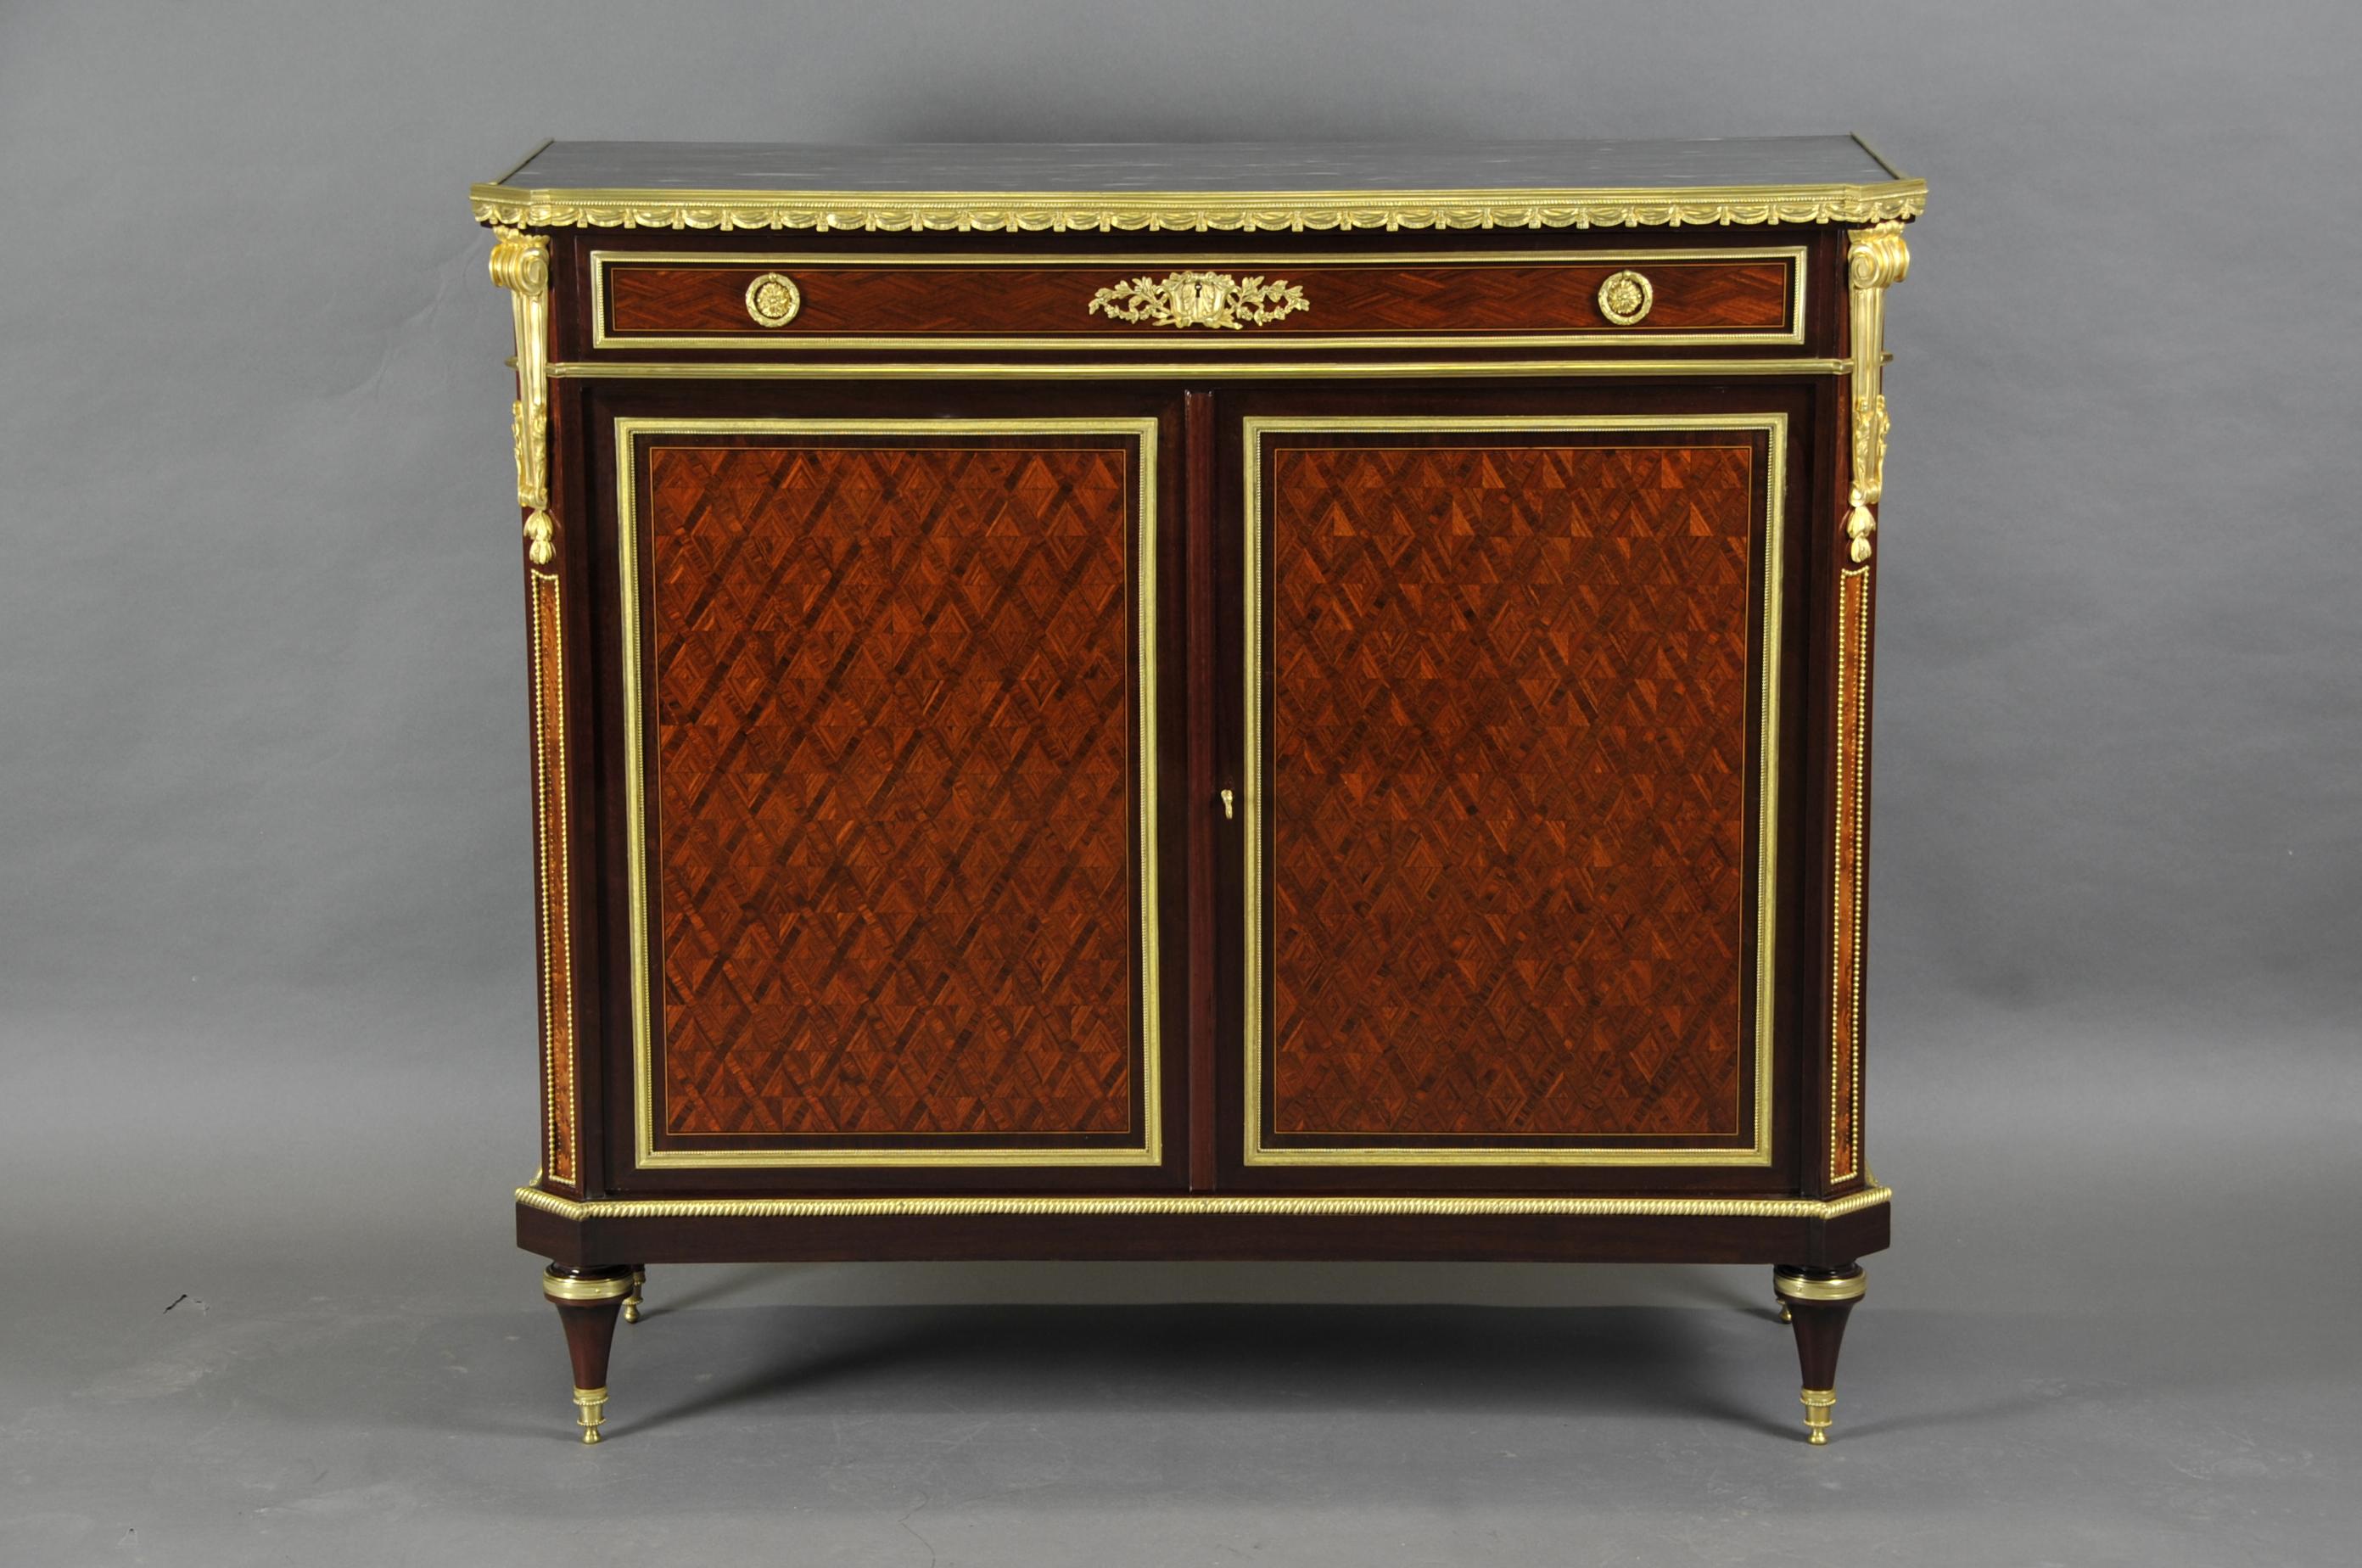 Elegant and refined Louis XVI meuble d'appui in trellis and diamond marquetry made of violet wood and rosewood in amaranth frames. Opening two doors and a drawer, topped with a blue turquin marble top and endowed with a magnificent ornamentation of